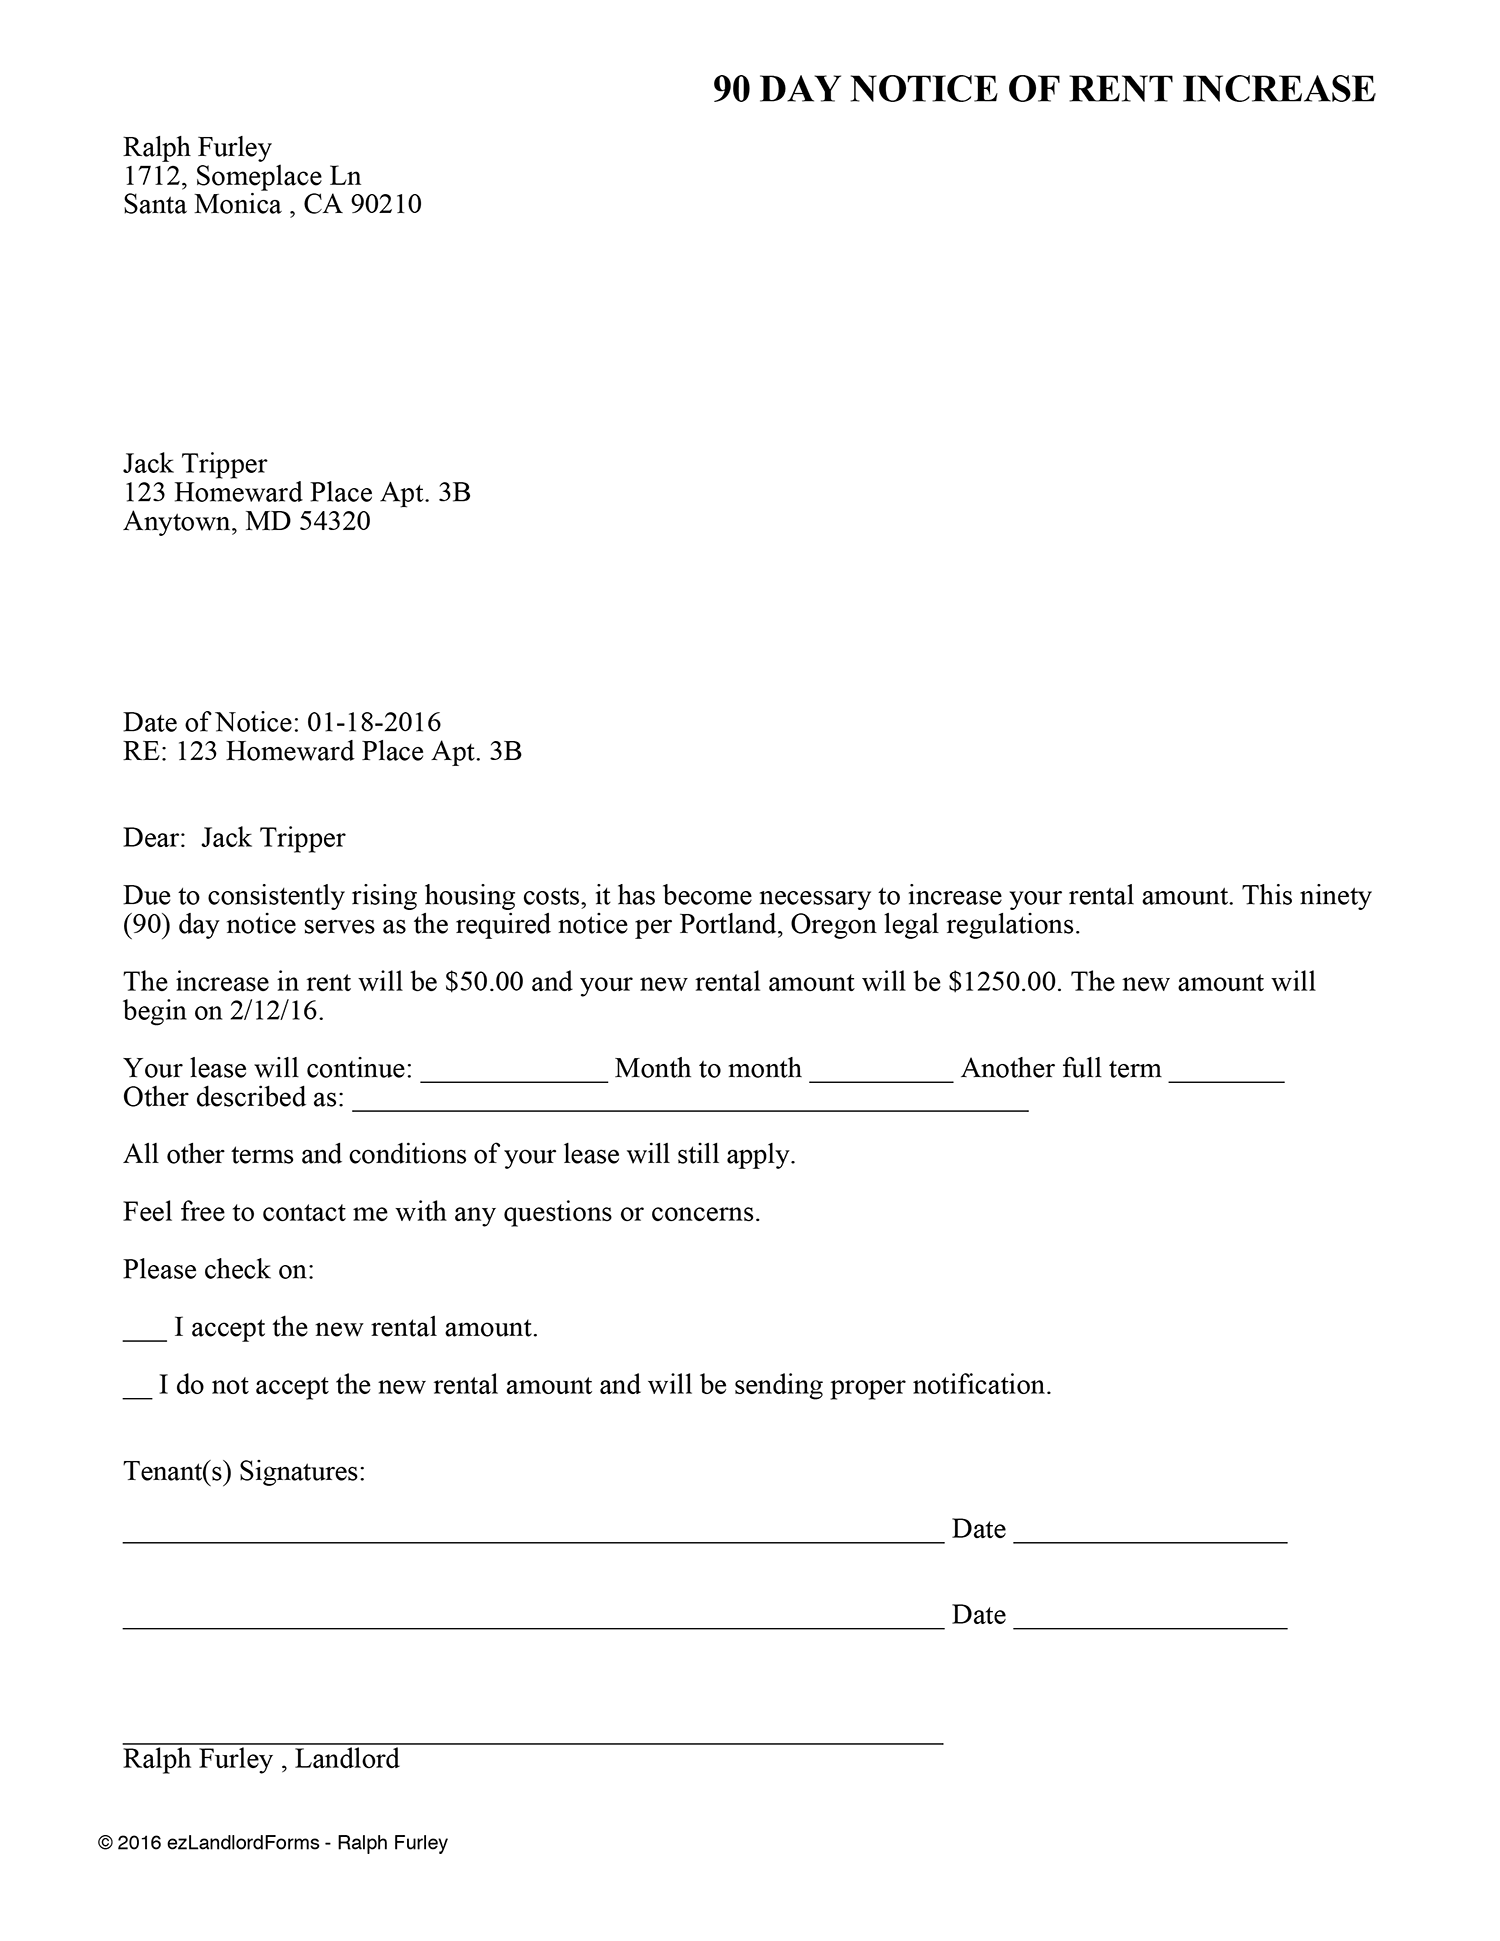 Free Rent Increase Letter Pdf from www.ezlandlordforms.com